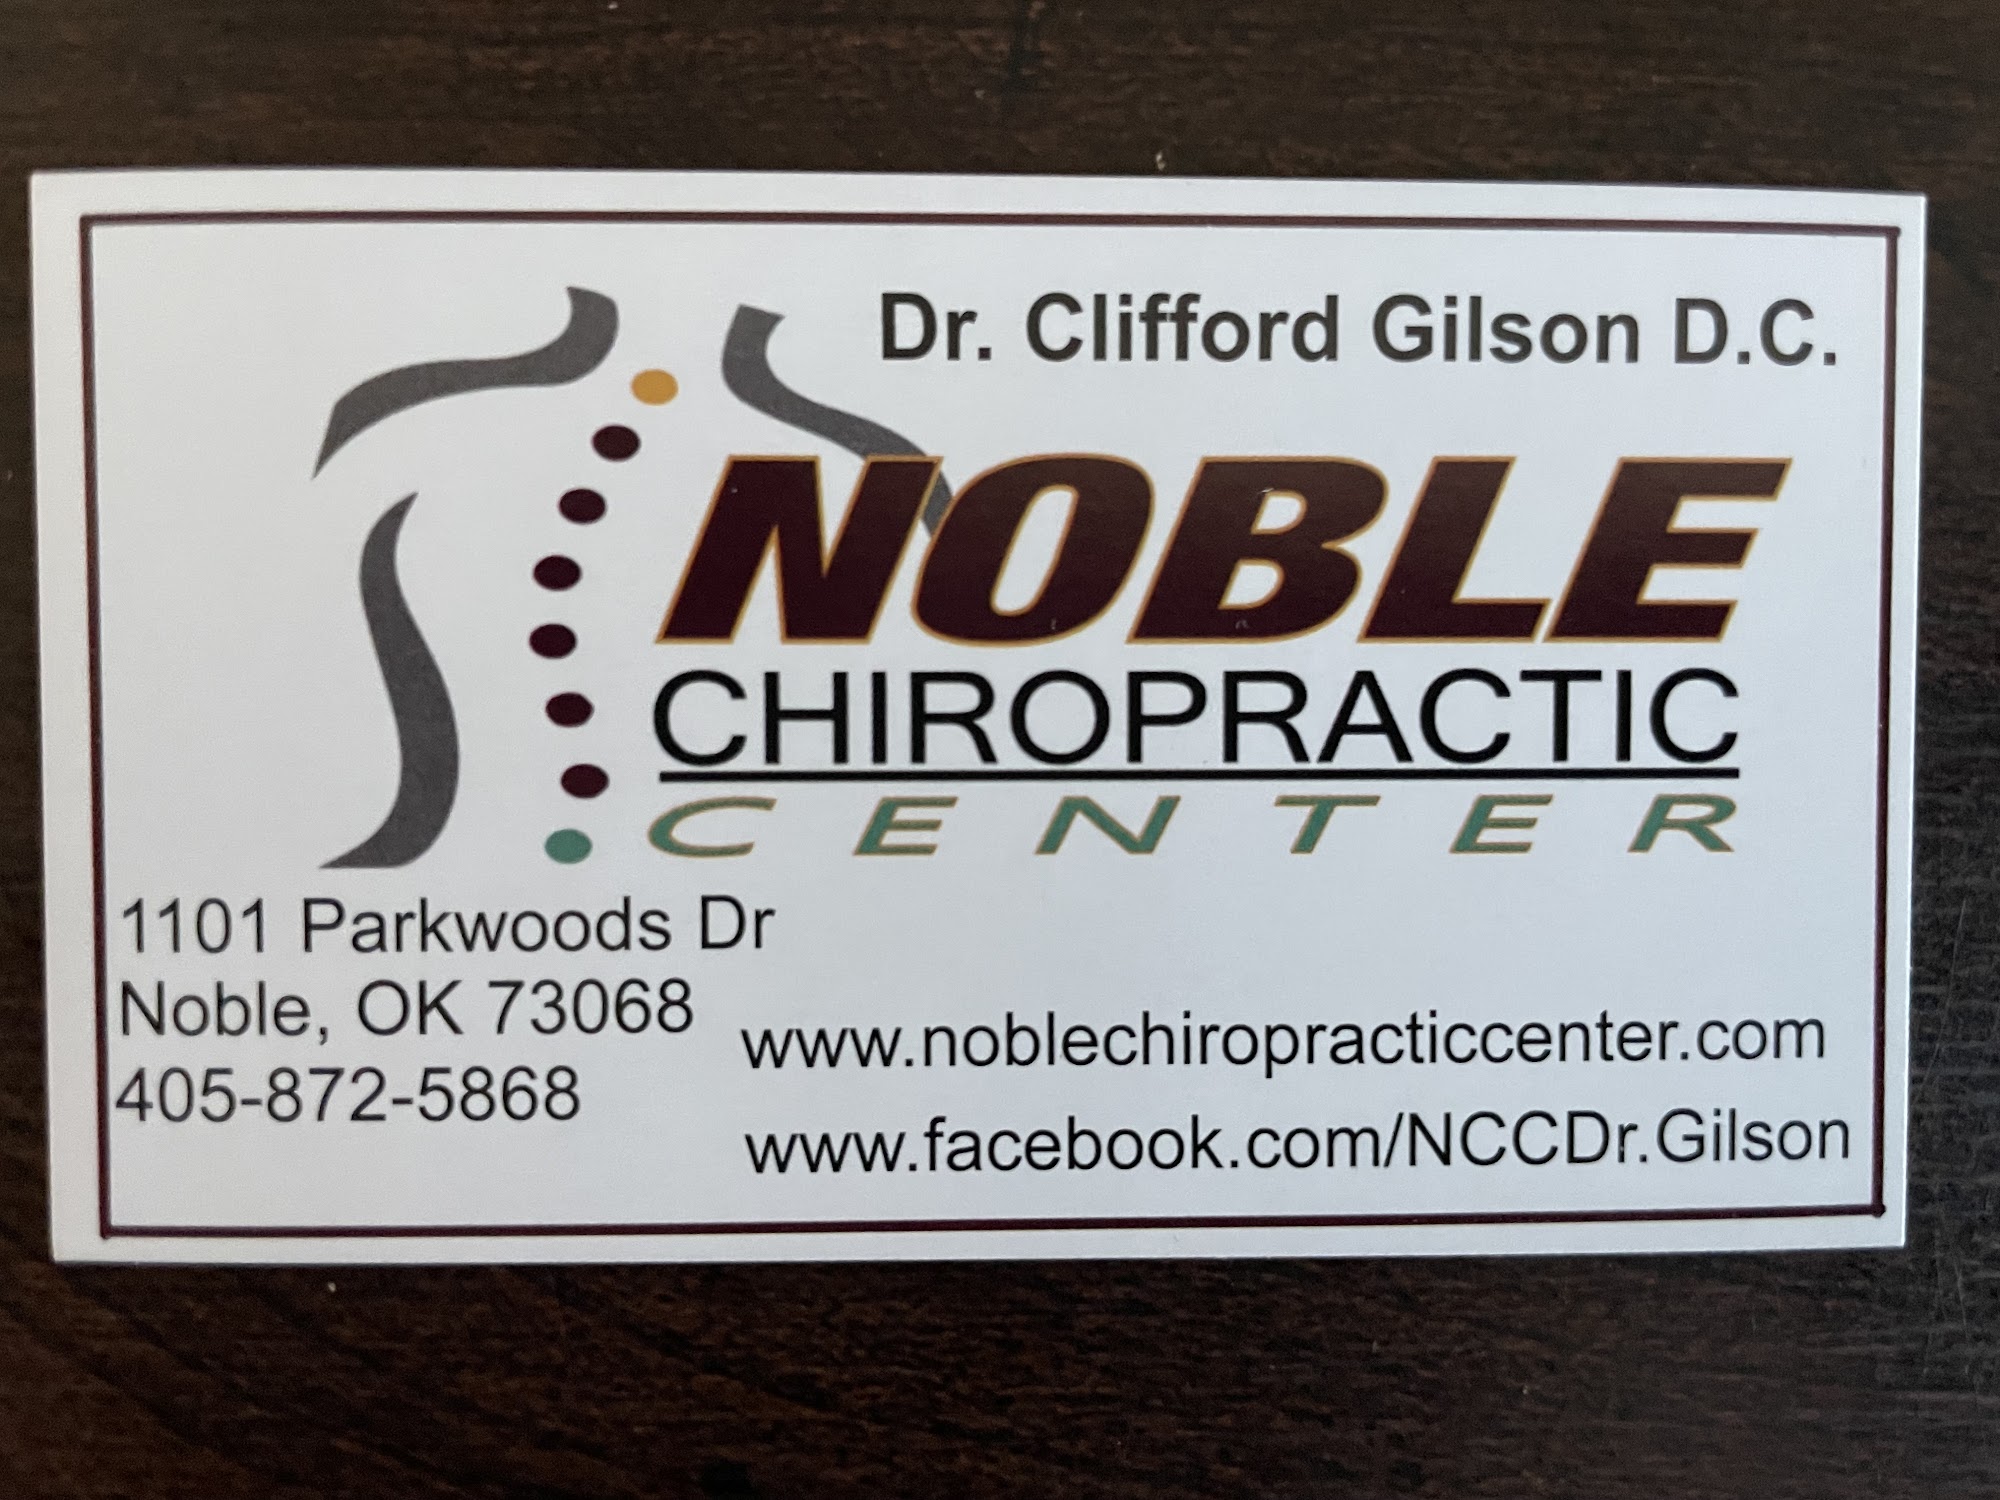 Noble Chiropractic Center 1101 Parkwoods Dr, Noble Oklahoma 73068